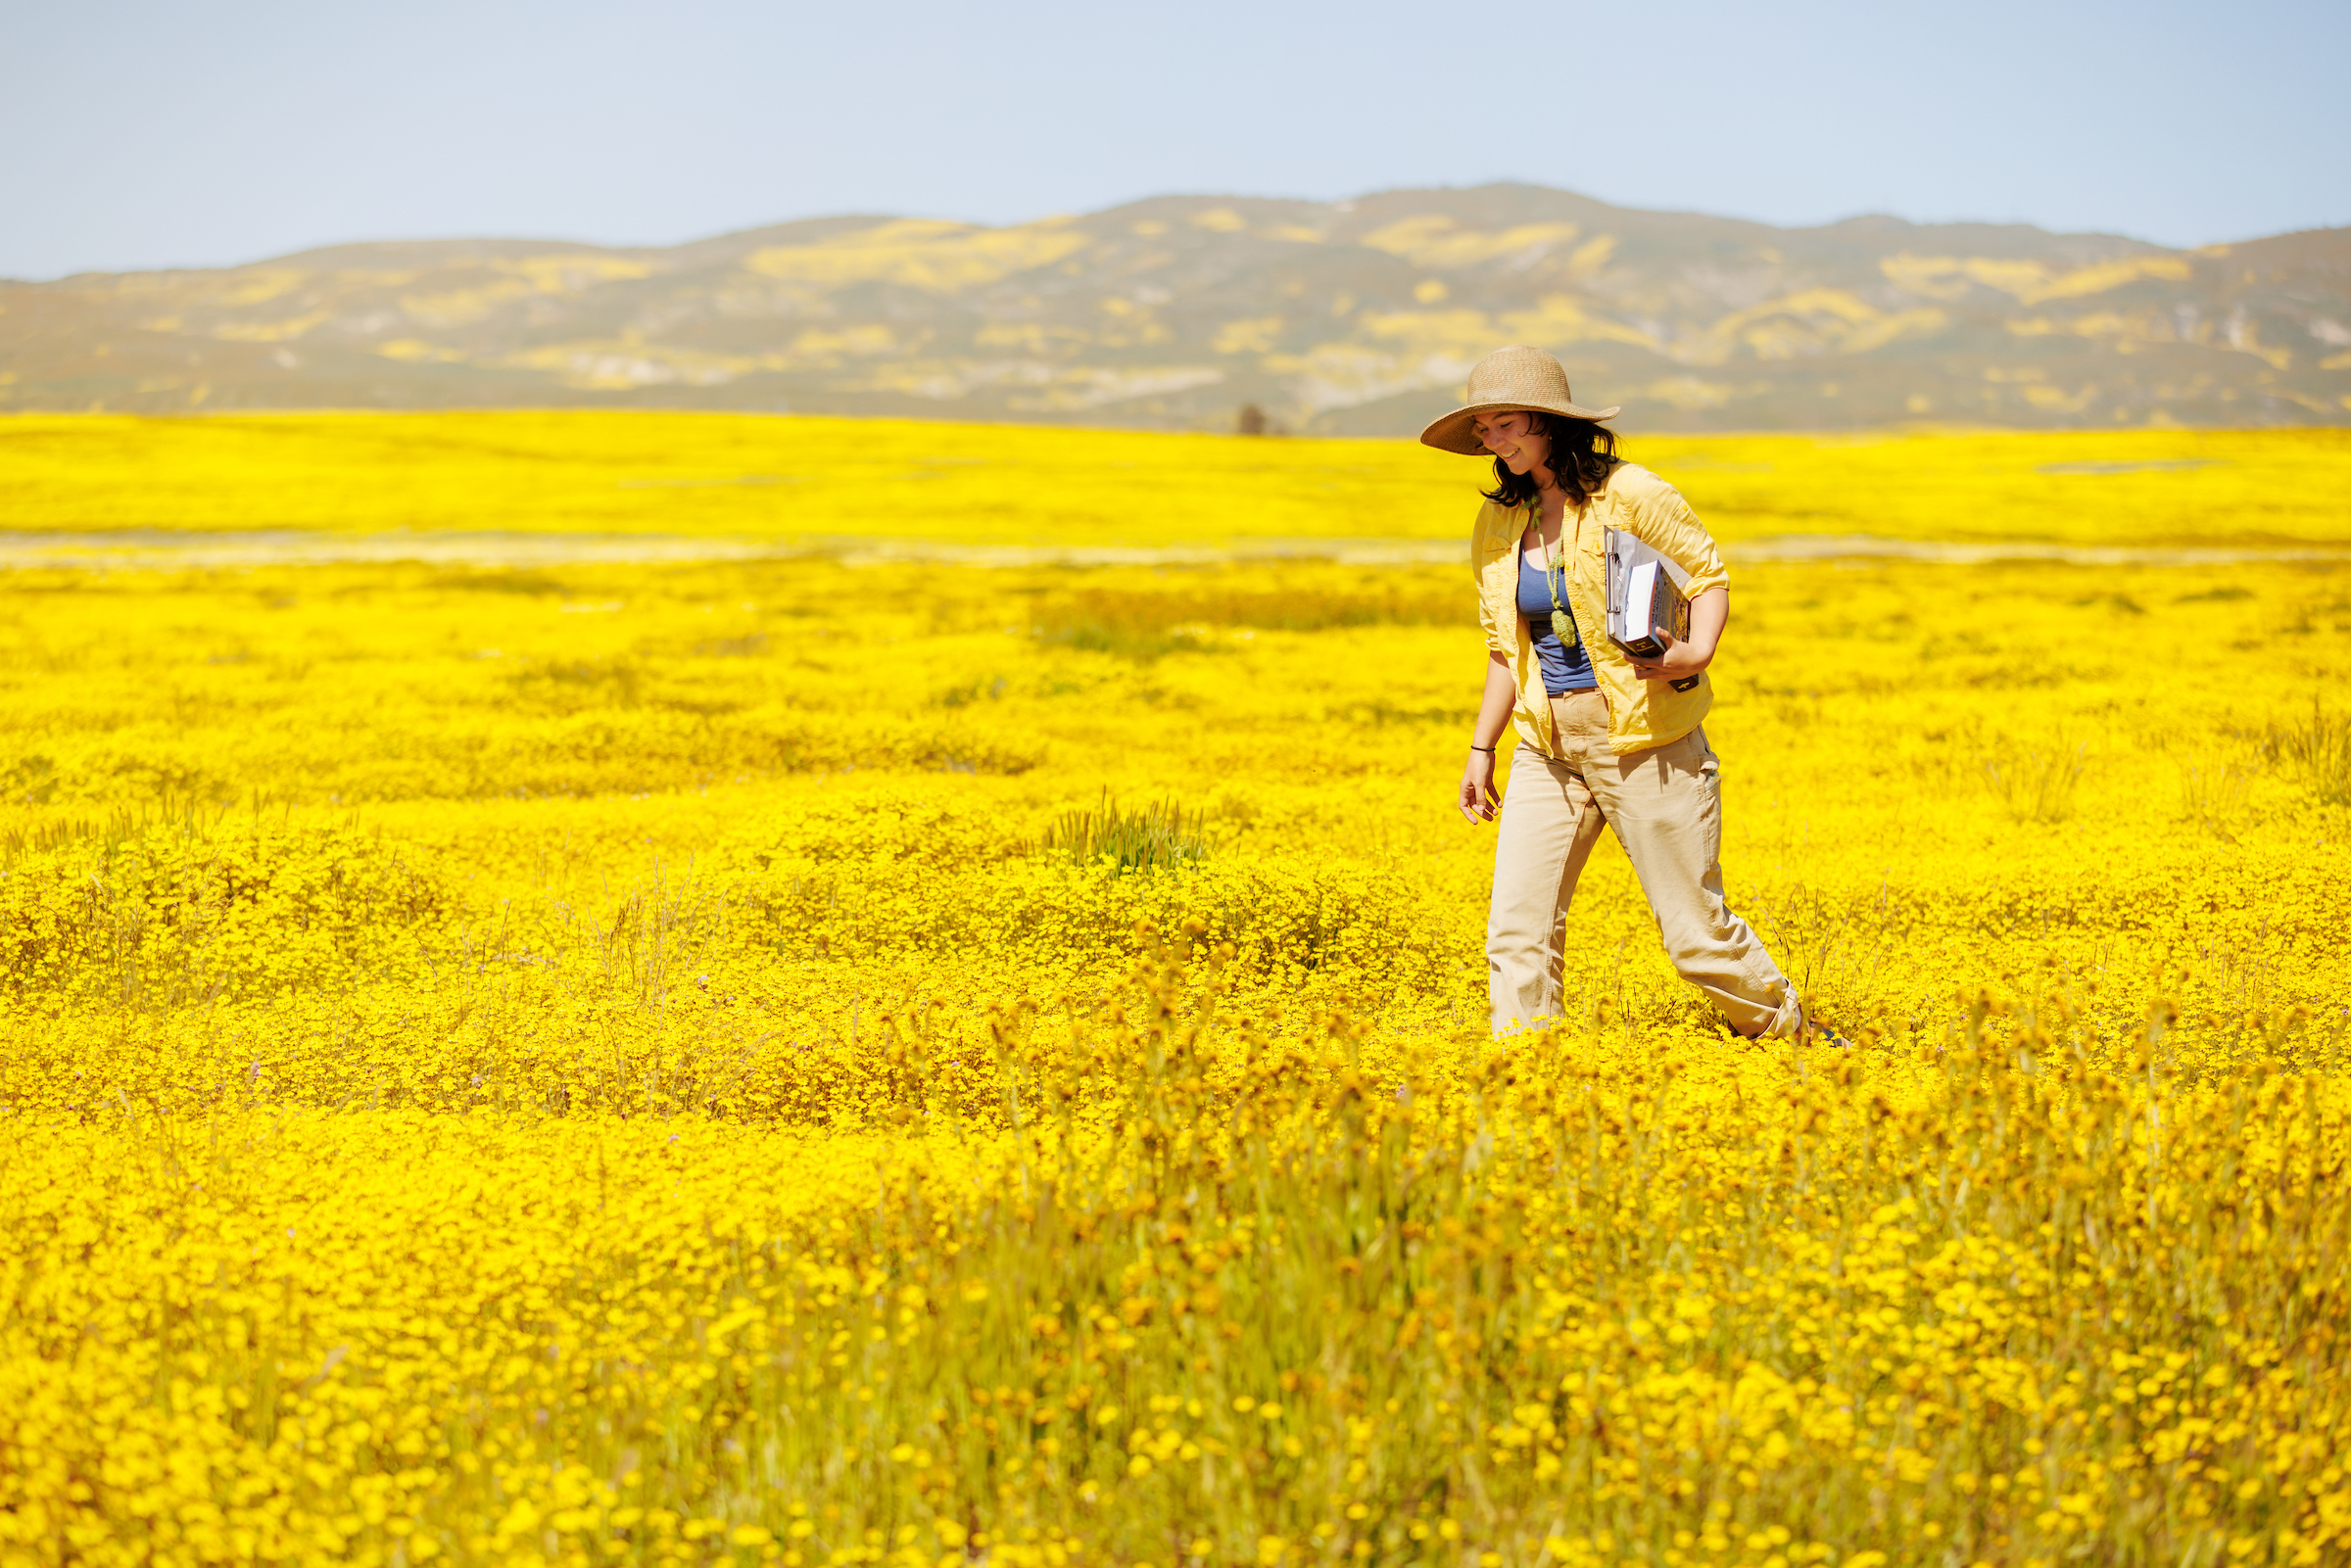 A student walks through a field of yellow flowers on the Carrizo Plain. In the background, mountains are painted with splashes of yellow and purple wildflowers.